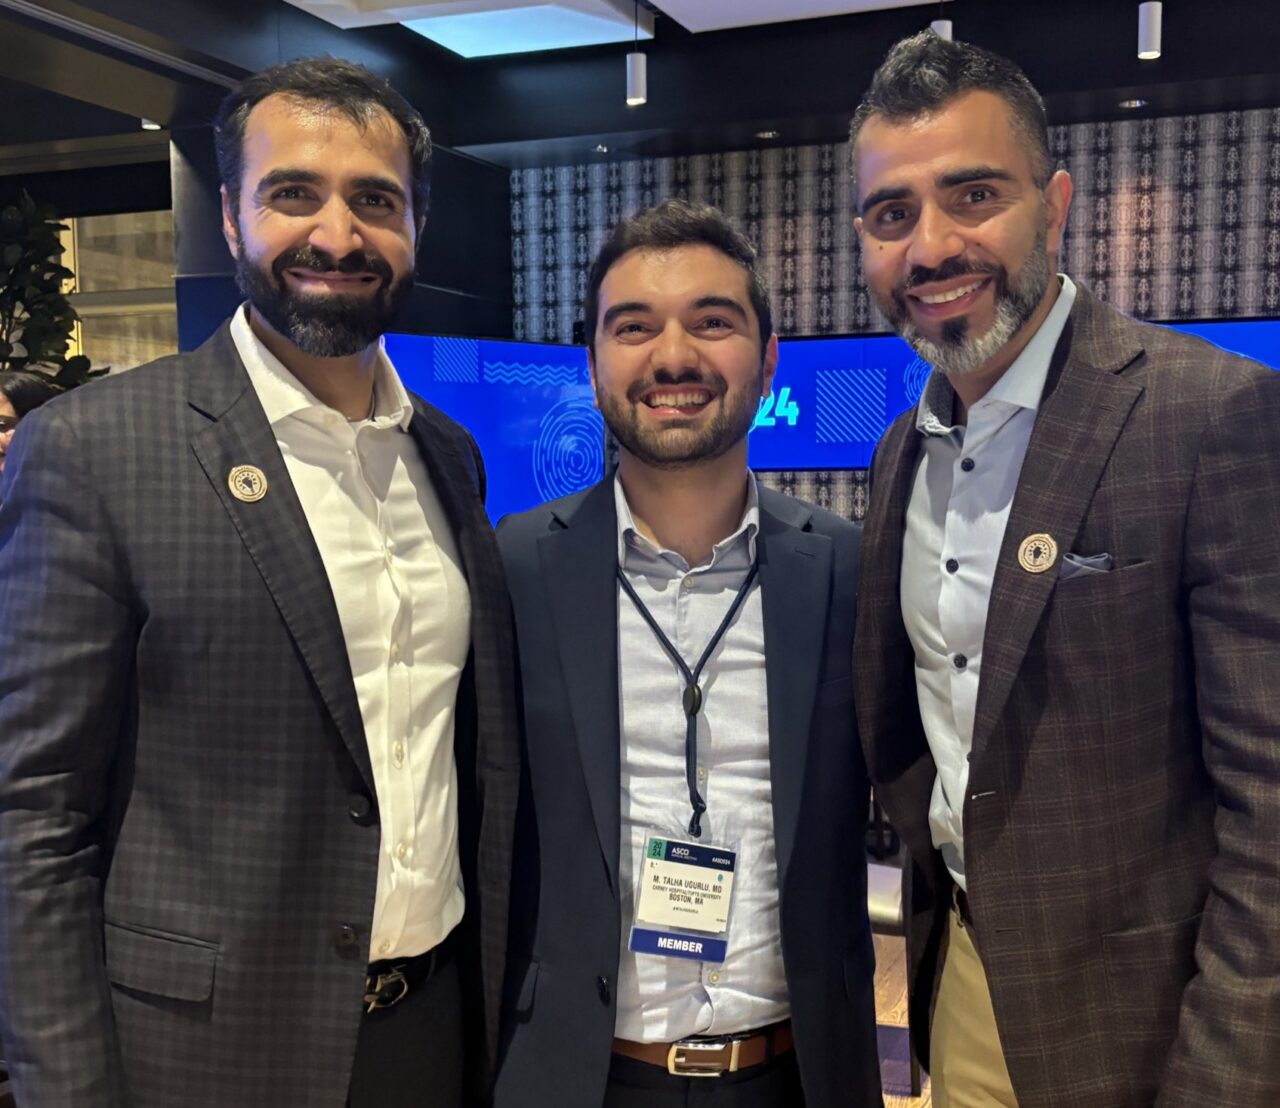 M. Talha Ugurlu: I attended the Advancements in Oncology event by Oncology Brothers